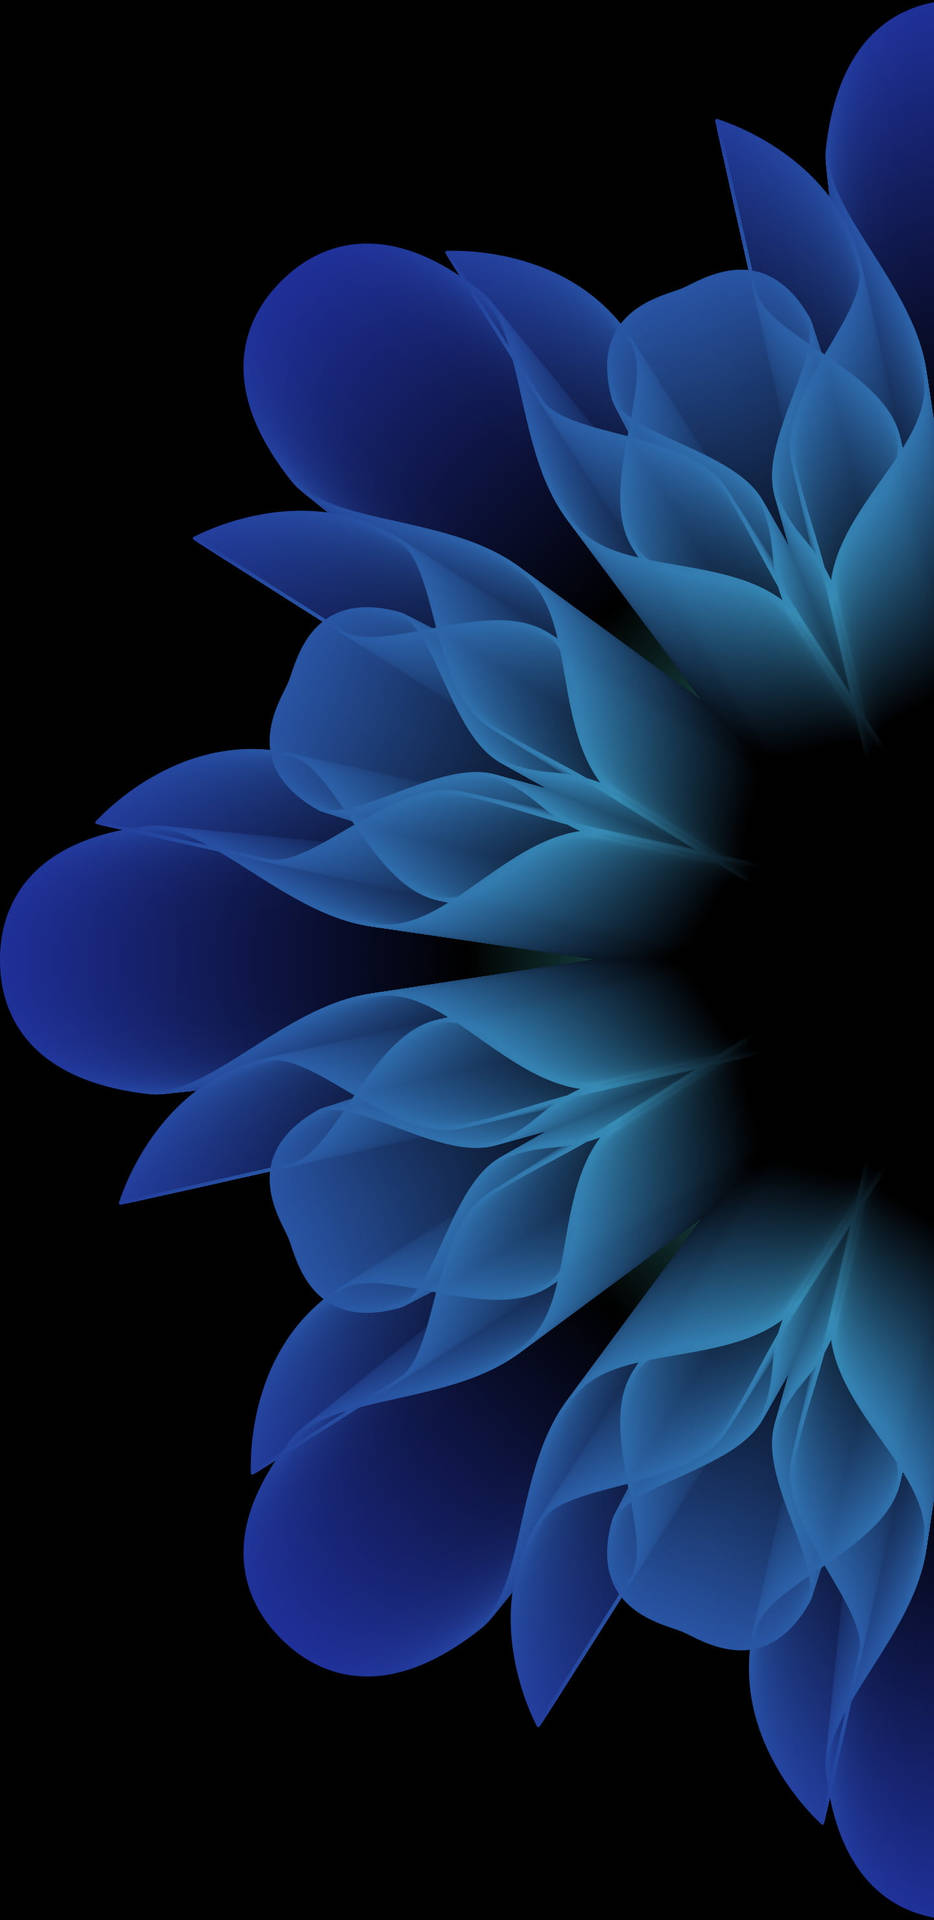 AMOLED Android Solid Pastel Blue Flower Wallpaper